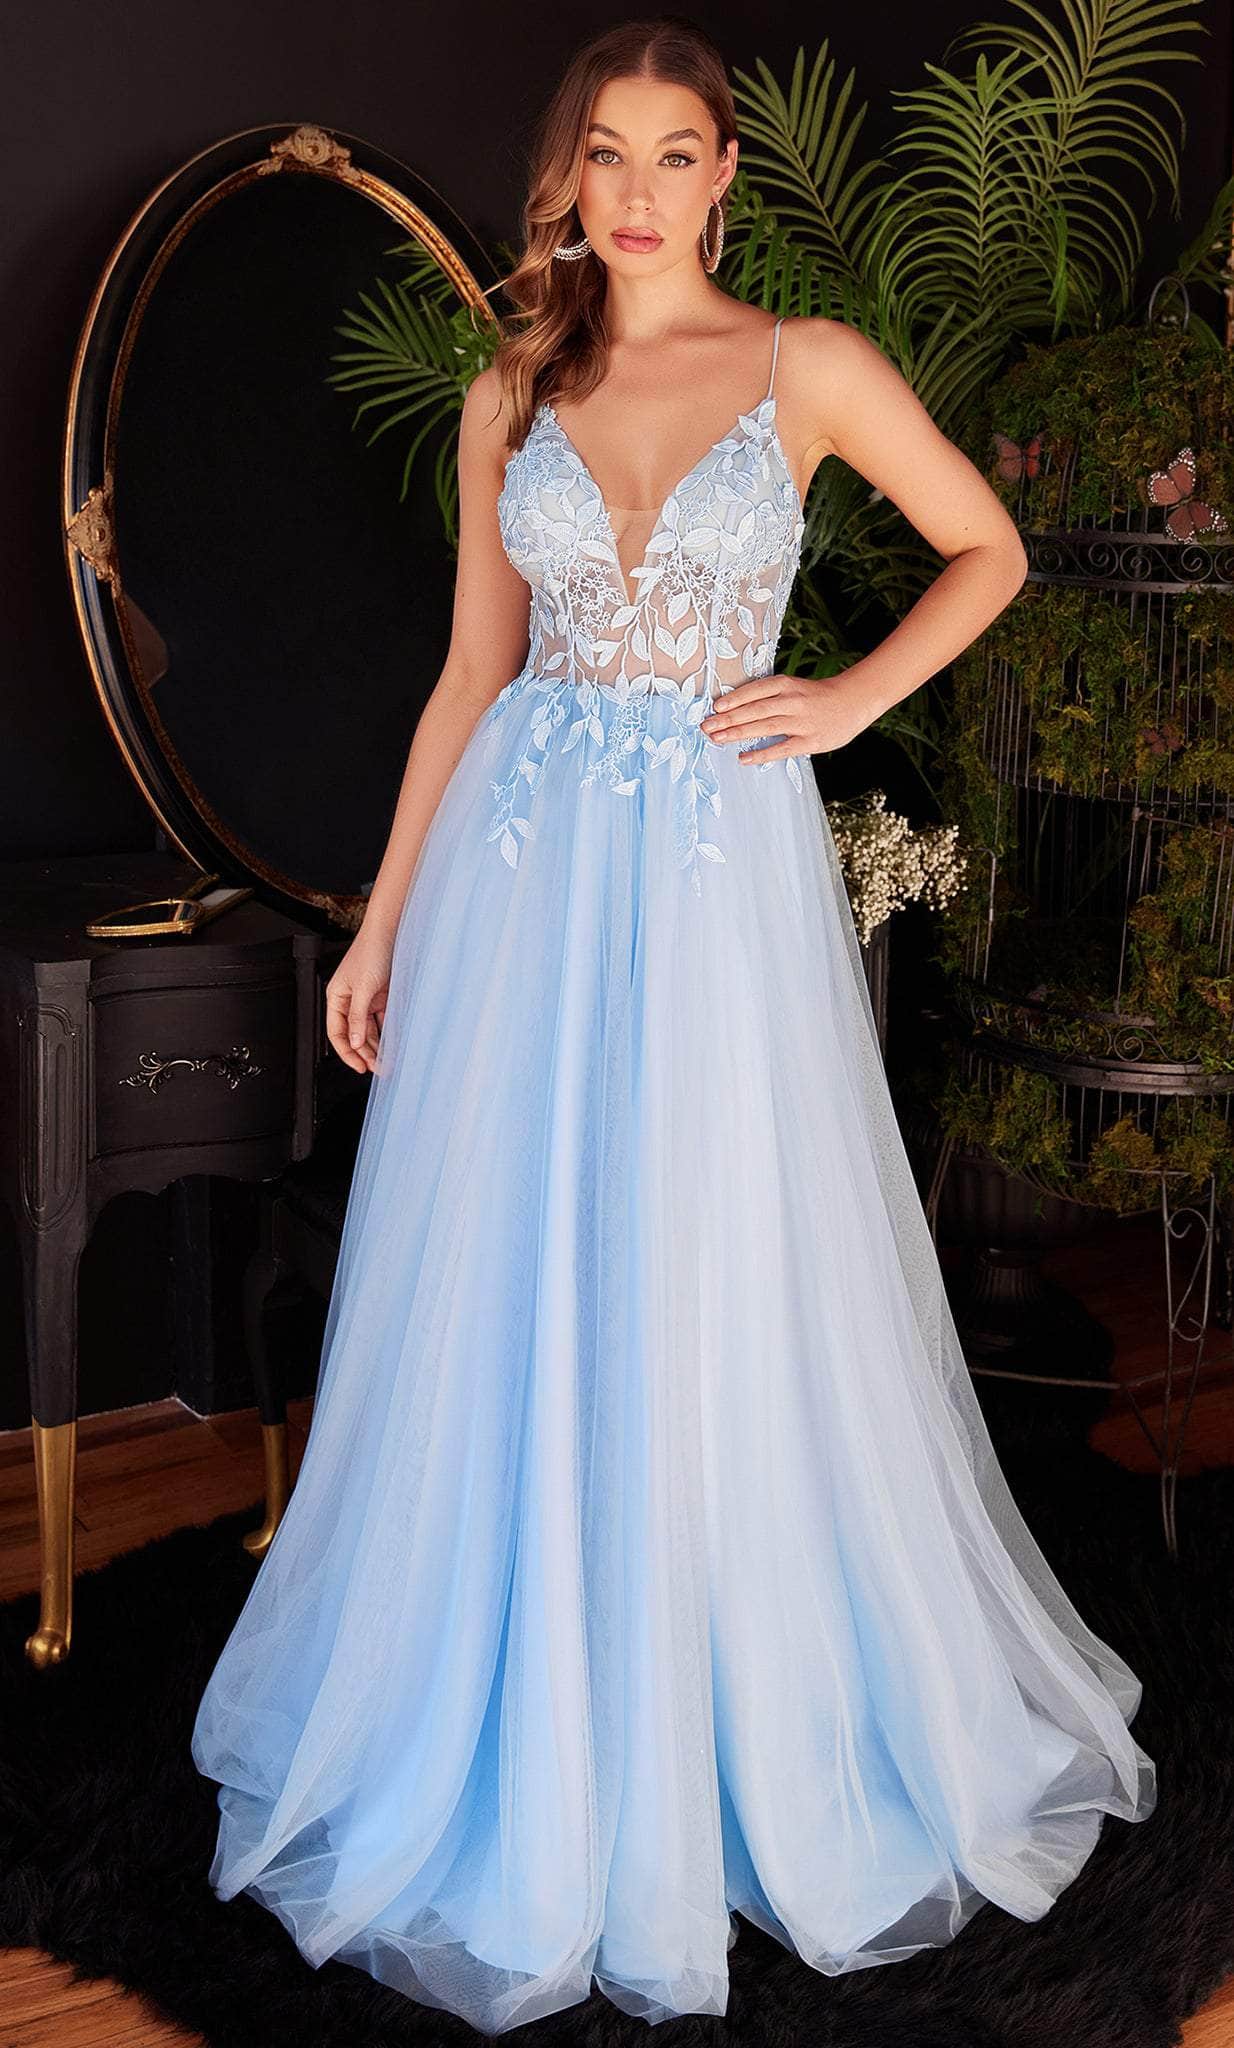 Image of Ladivine CD2214 - Plunging V-Neck Appliqued Classic Prom Gown